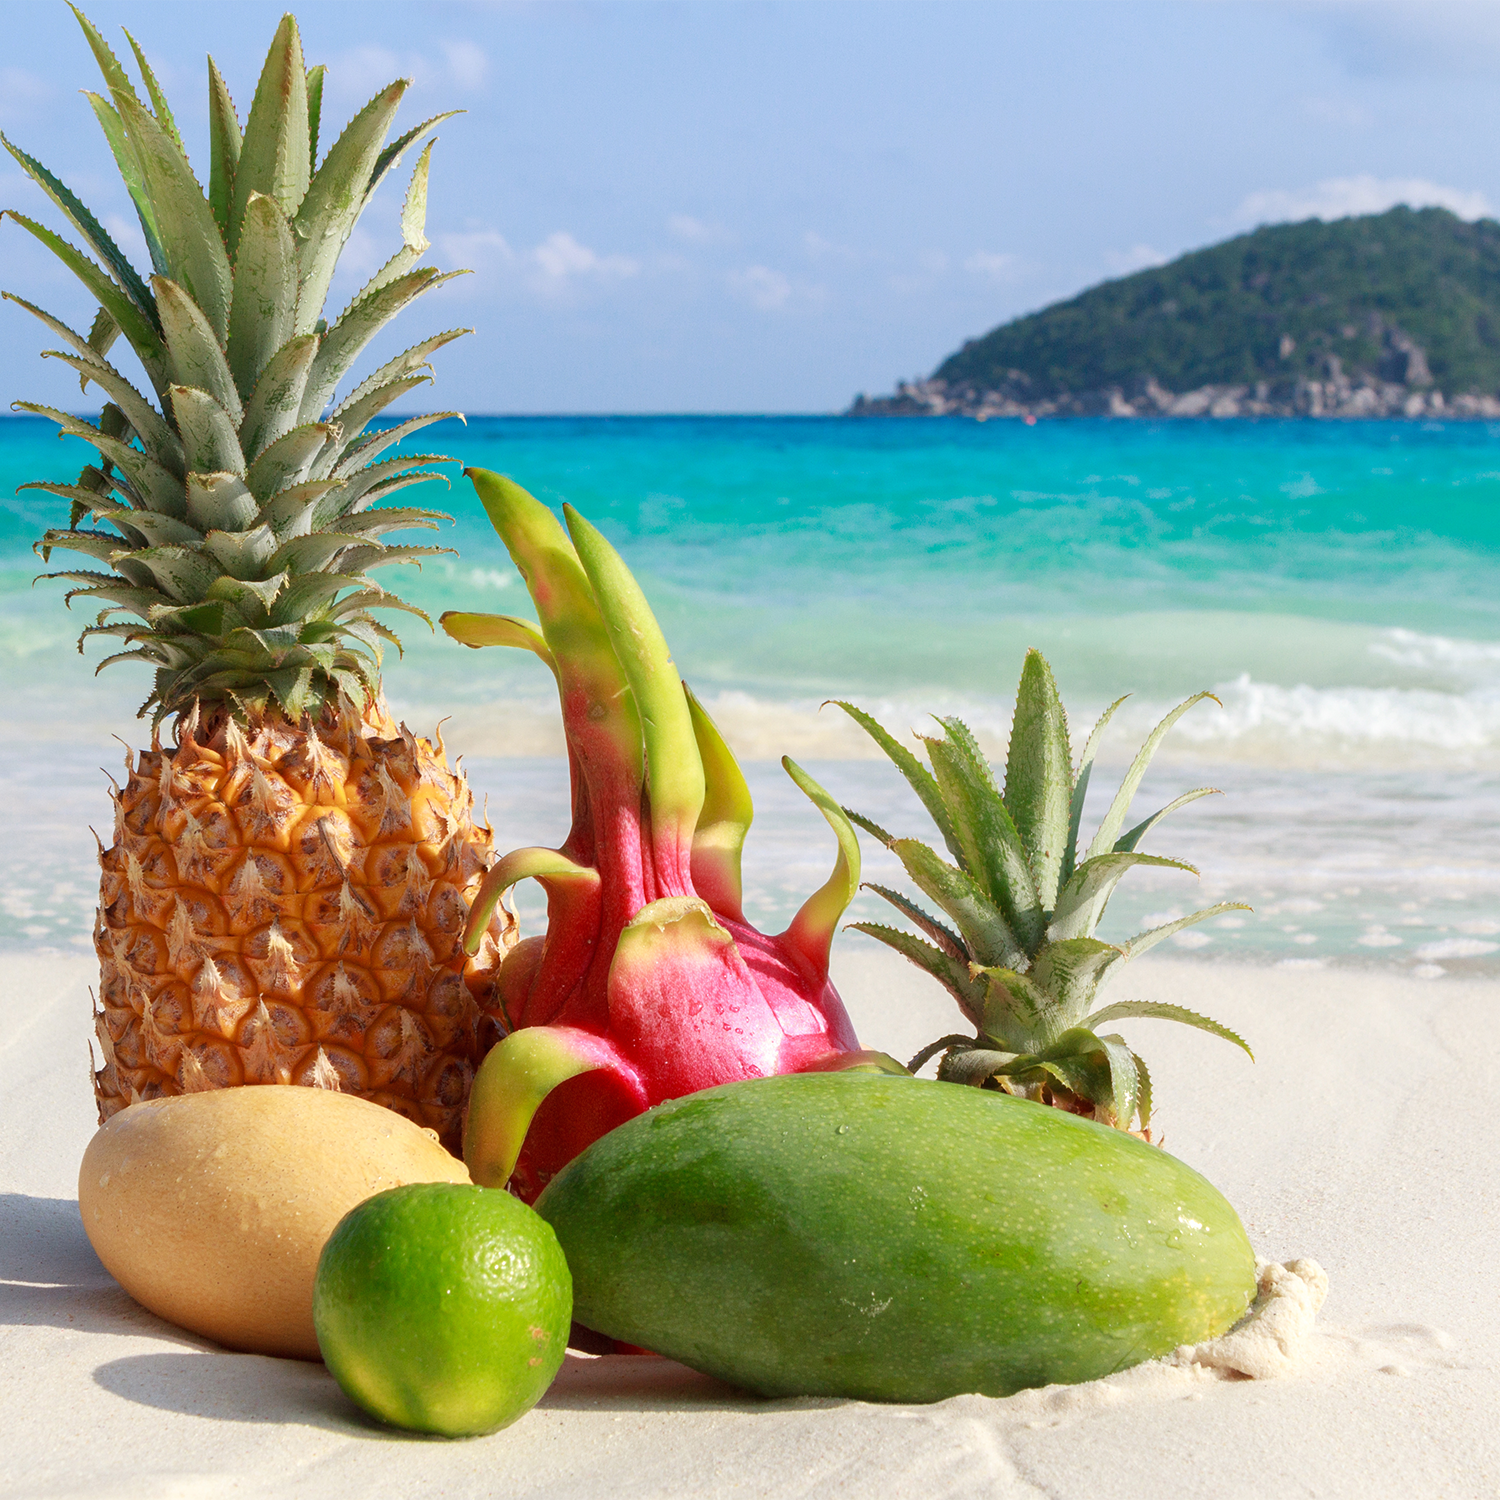 Pineapple and tropical fruit at a beach - inspiration for our "coconut colada" wax melt snap bar